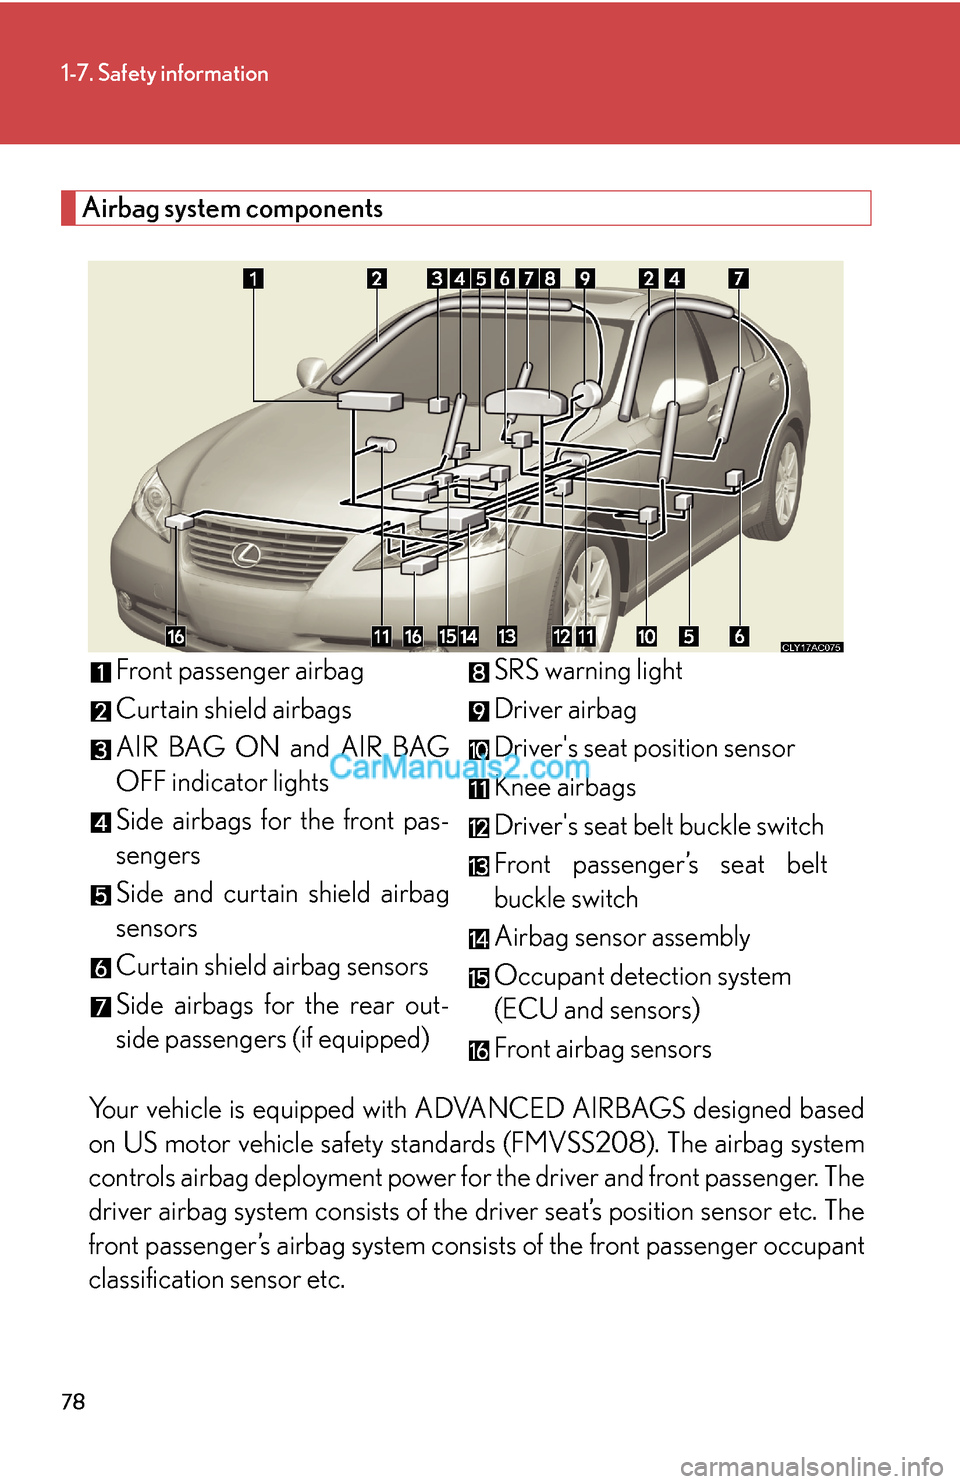 Lexus ES350 2008  Safety information 78
1-7. Safety information
Airbag system components
Your vehicle is equipped with ADVANCED AIRBAGS designed based
on US motor vehicle safety standards (FMVSS208). The airbag system
controls airbag dep